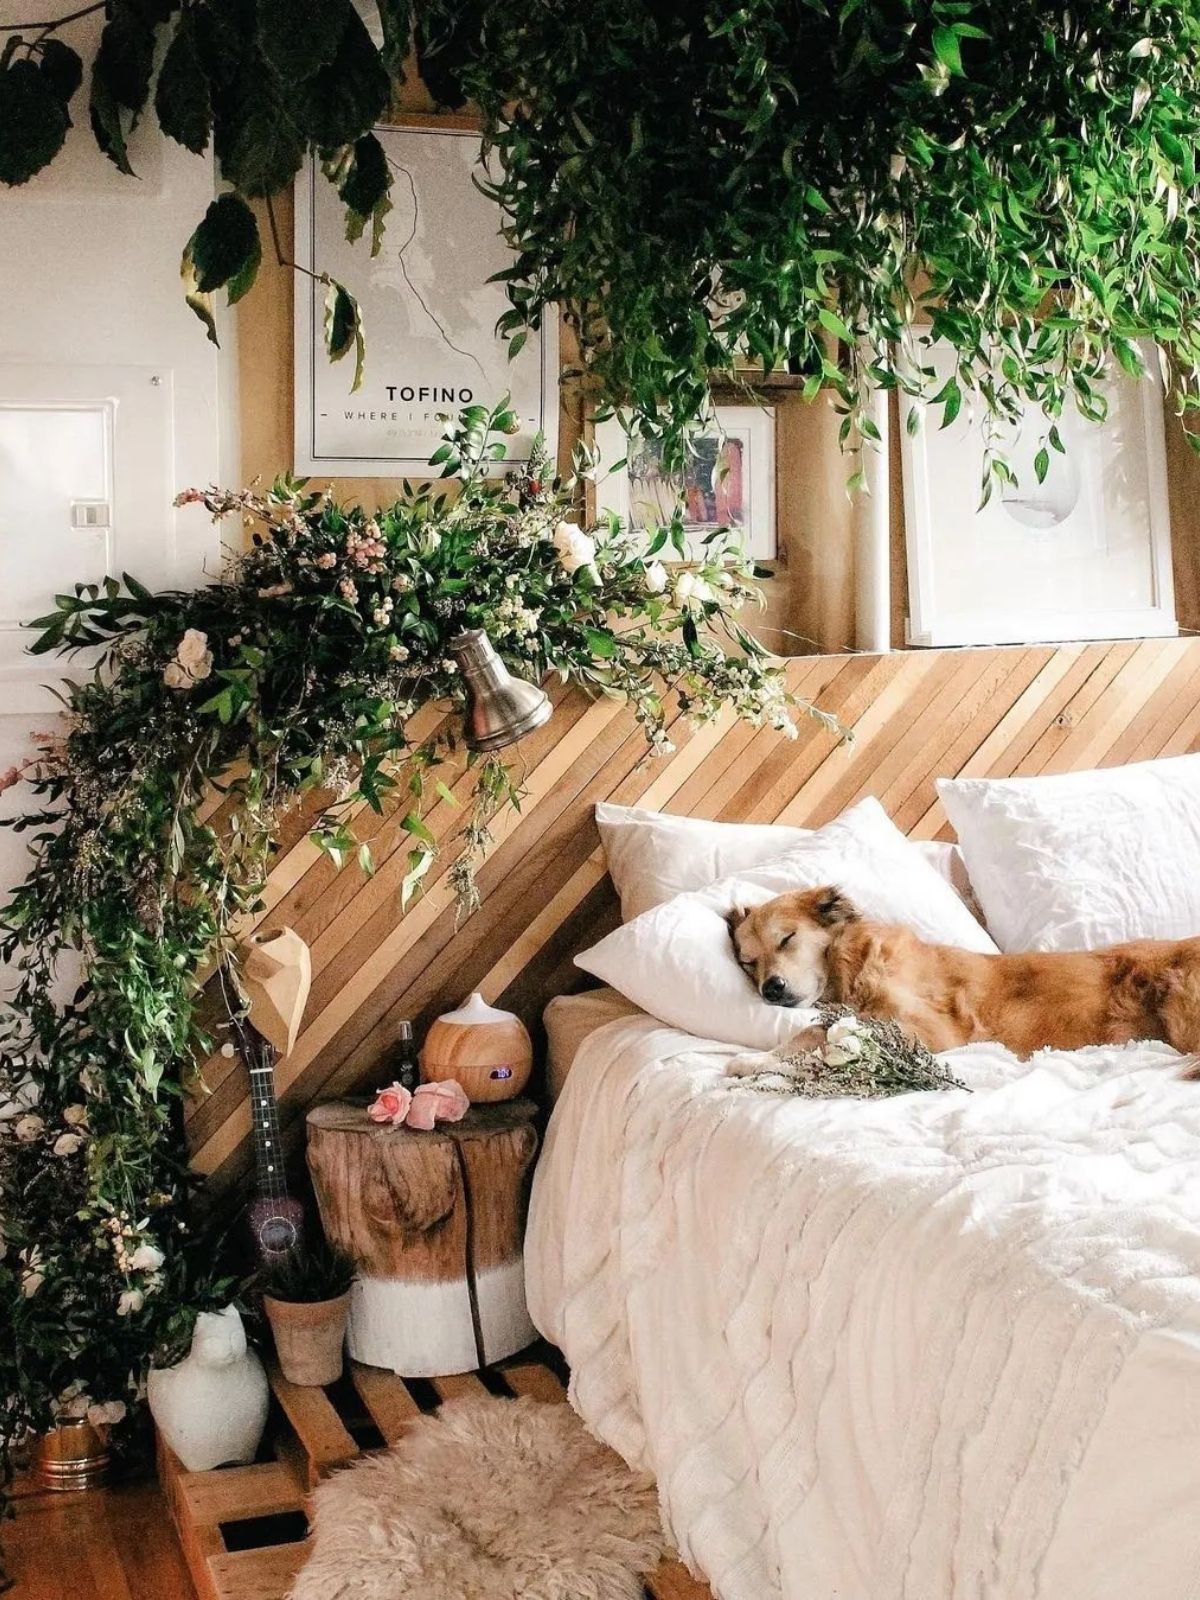 Dog in bedroom filled with plants